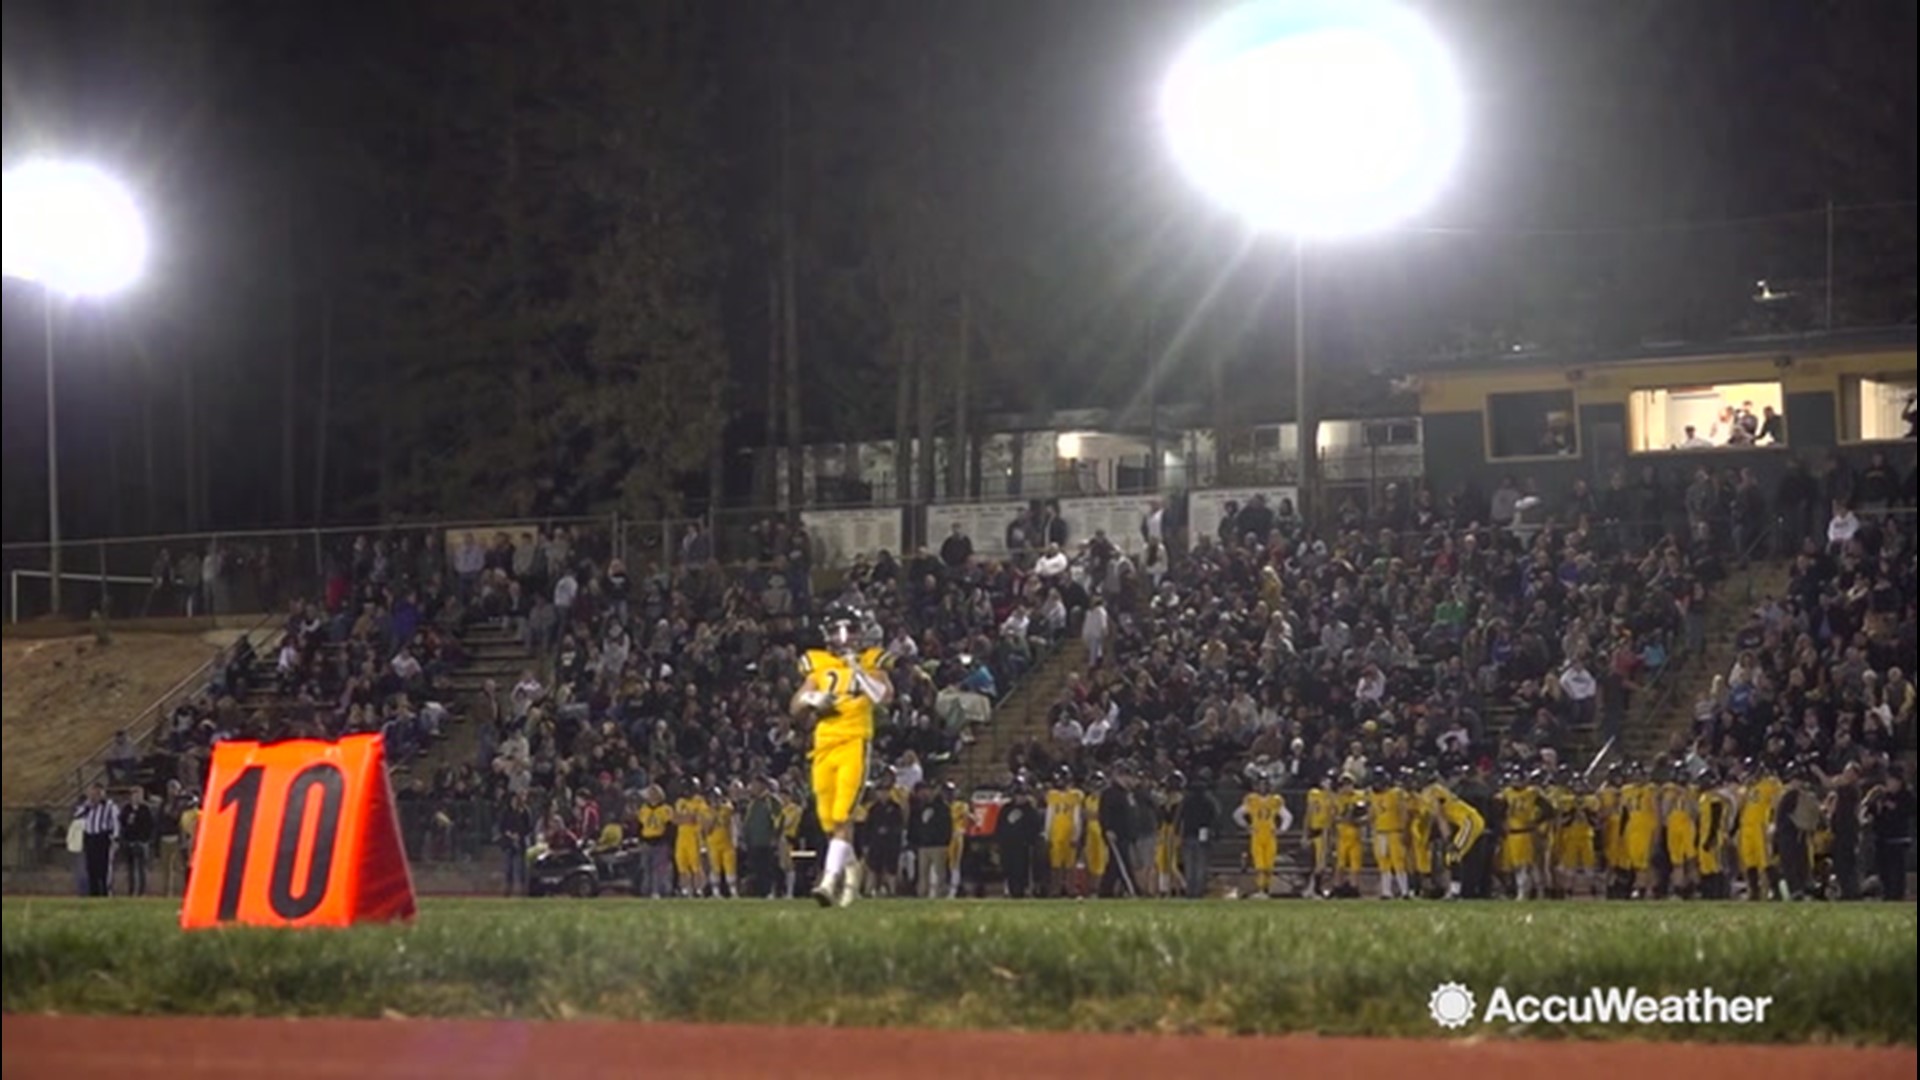 The varsity football team in Paradise is defending their undefeated season in a playoff run, just one year ago a wildfire nearly wiped the Northern California town off the map. AccuWeather's Bill Wadell watched the game with moms on both sides of the field, who are rooting for the Bobcats.